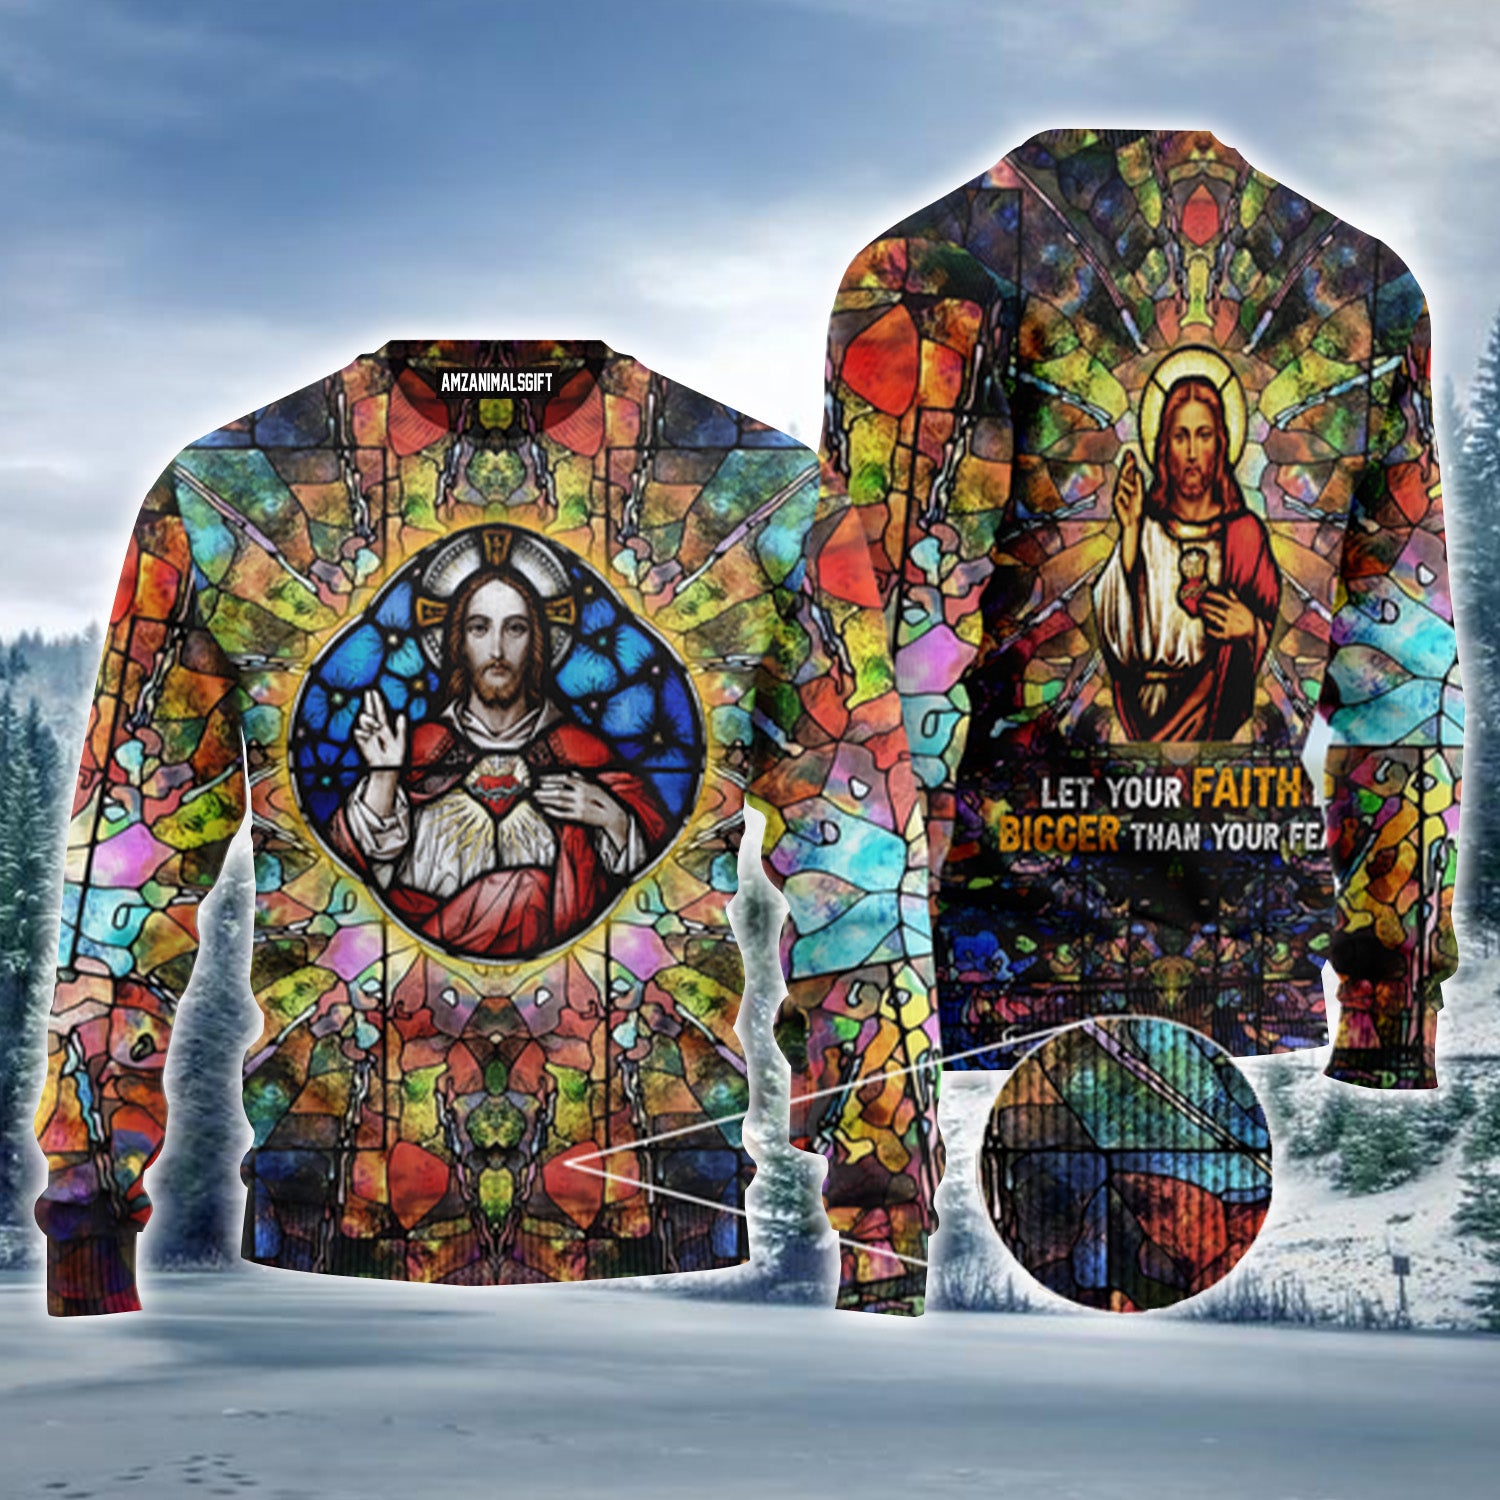 Jesus Showing His Heart Let Your Faith Be Bigger Urly Sweater, Christmas Sweater For Men & Women - Perfect Gift For New Year, Winter, Christmas